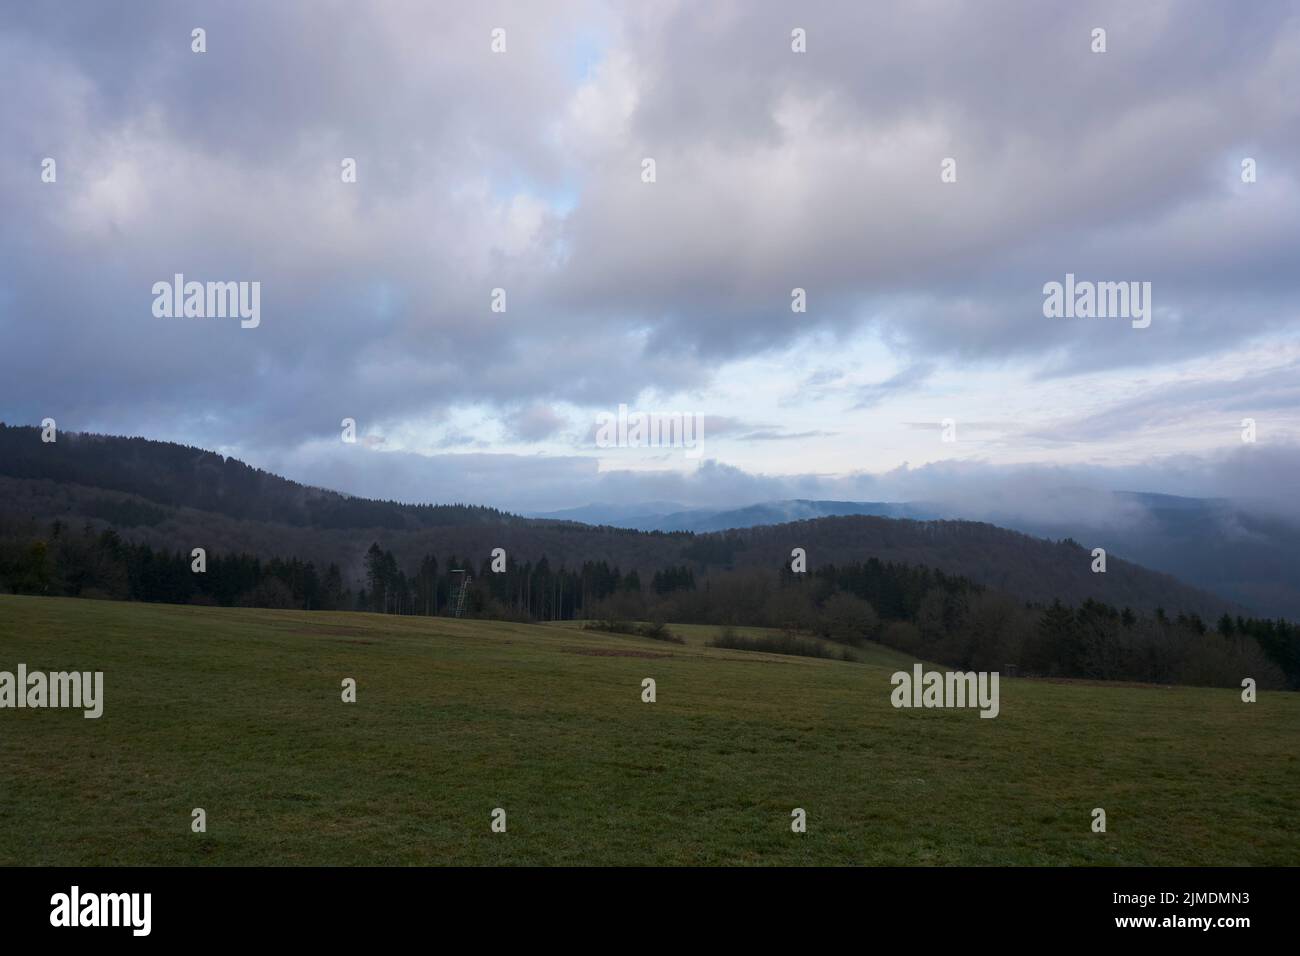 Landscape photo in rainy weather with fog and clouds in spring Stock Photo